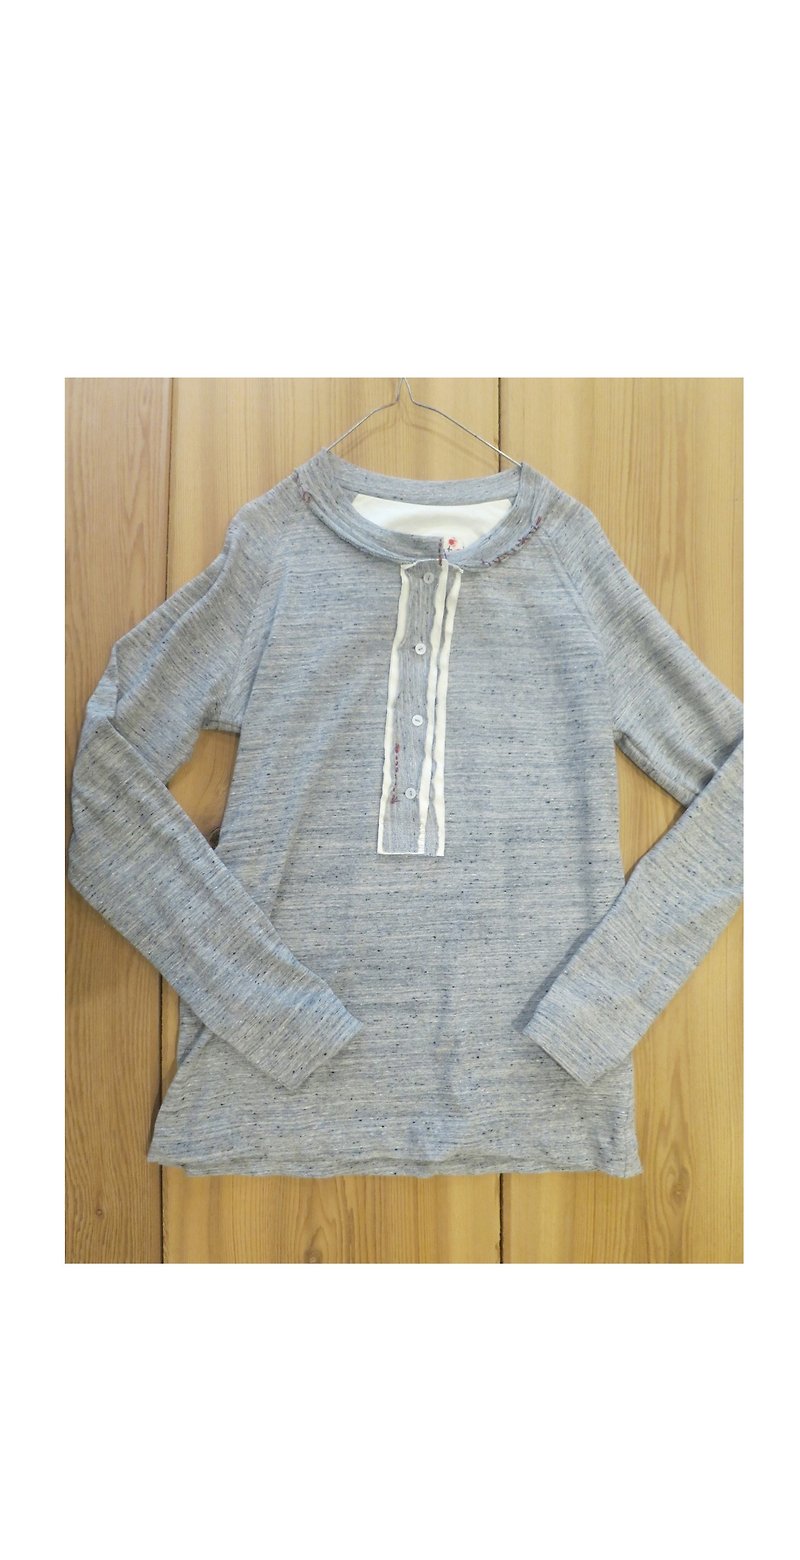 g1306 multilevel cardigans - Women's Tops - Other Materials Gray